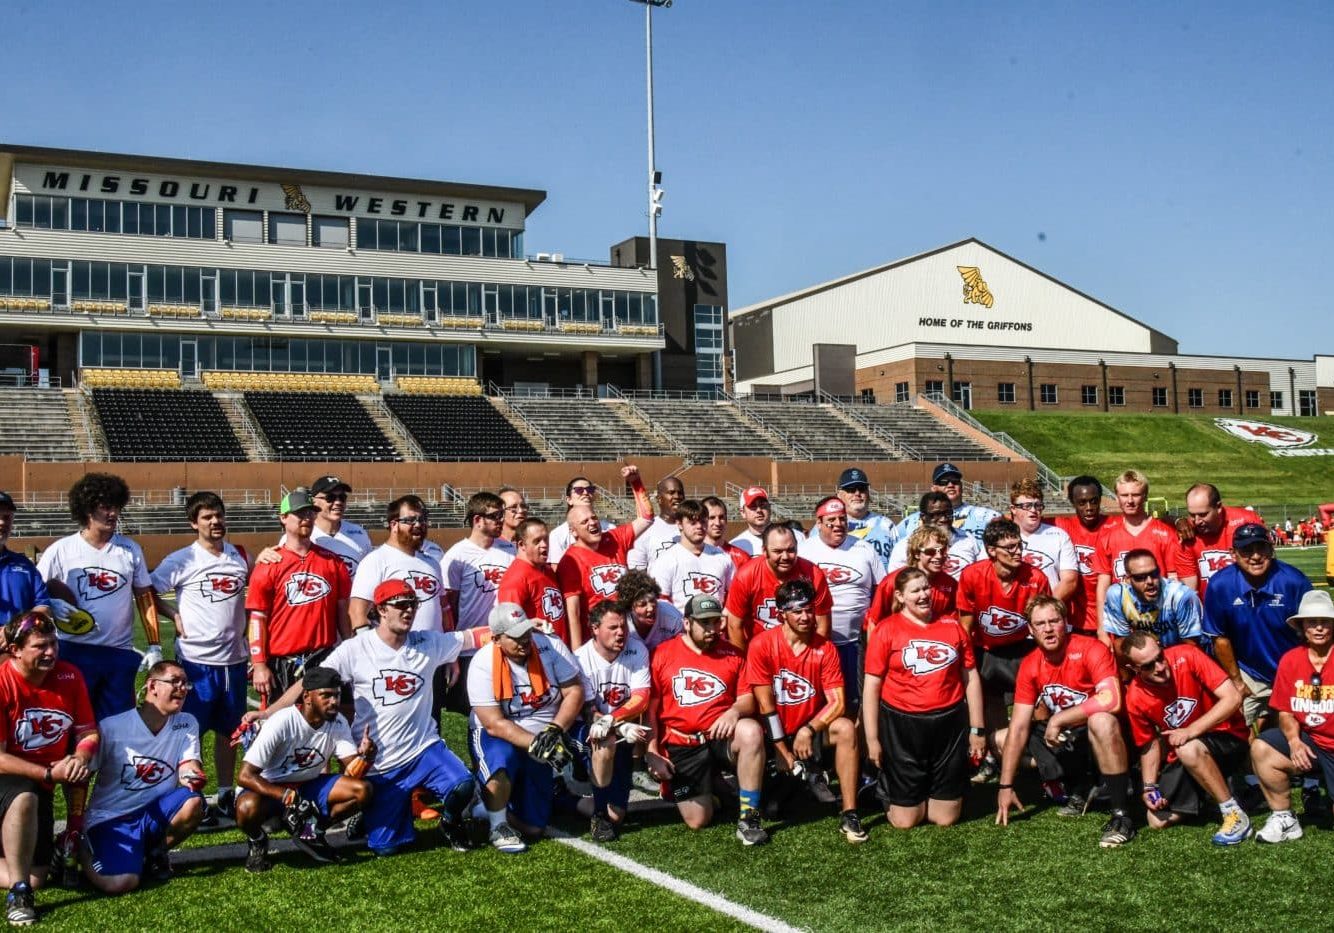 Special Olympics Missouri athletes played against athletes from Special Olympics Kansas at Spratt Stadium in St. Joseph, Mo. at Chiefs Training Camp on Thursday, August 4, 2022.